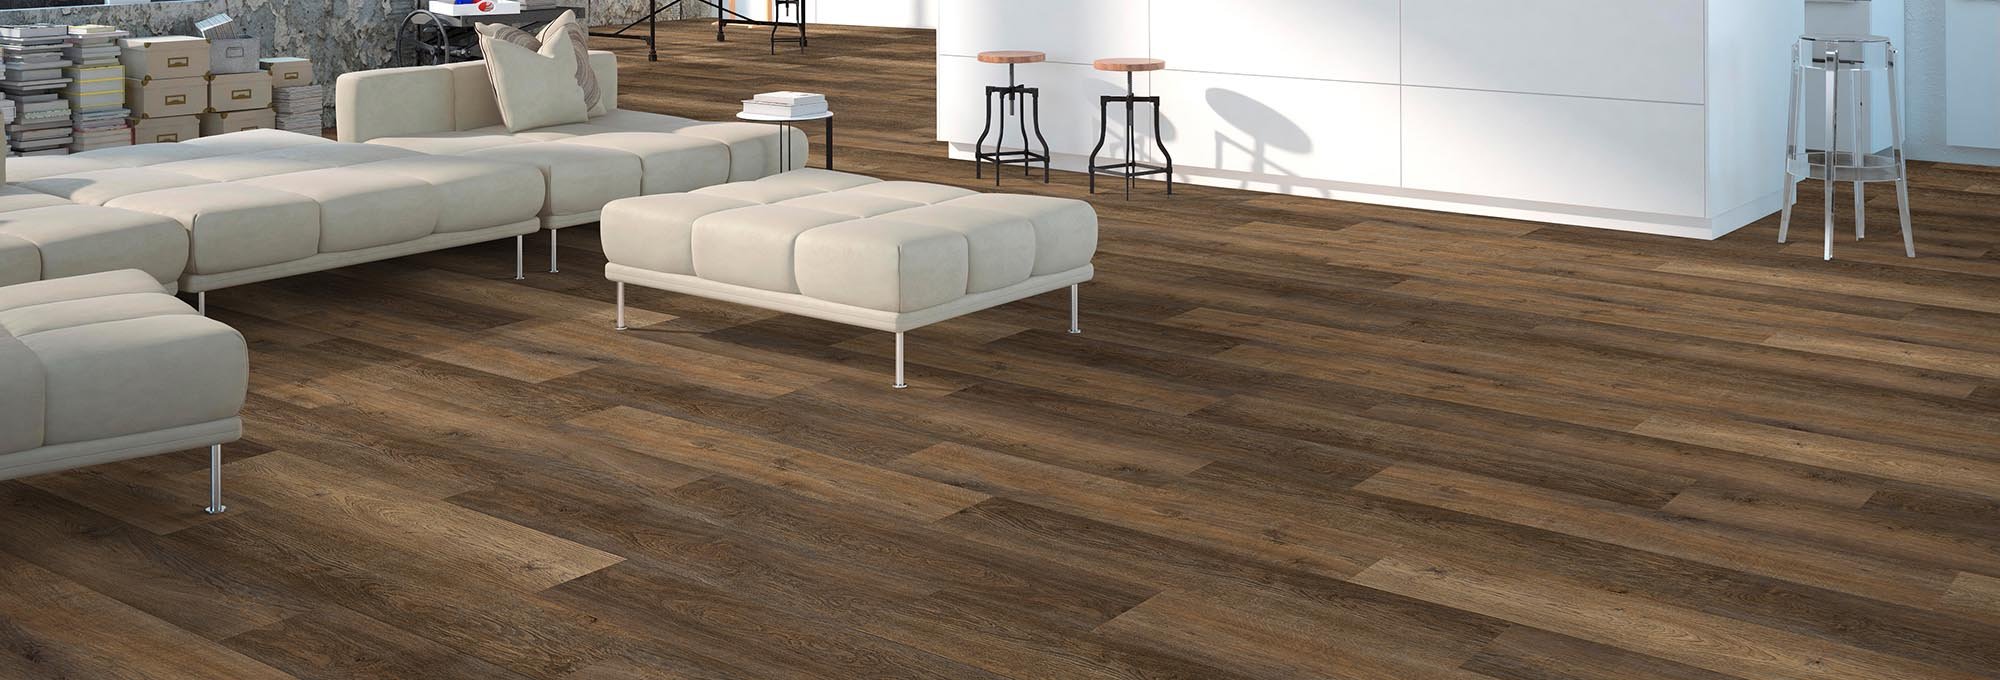 Shop Flooring Products from Walter's Flooring in West Bend, WI